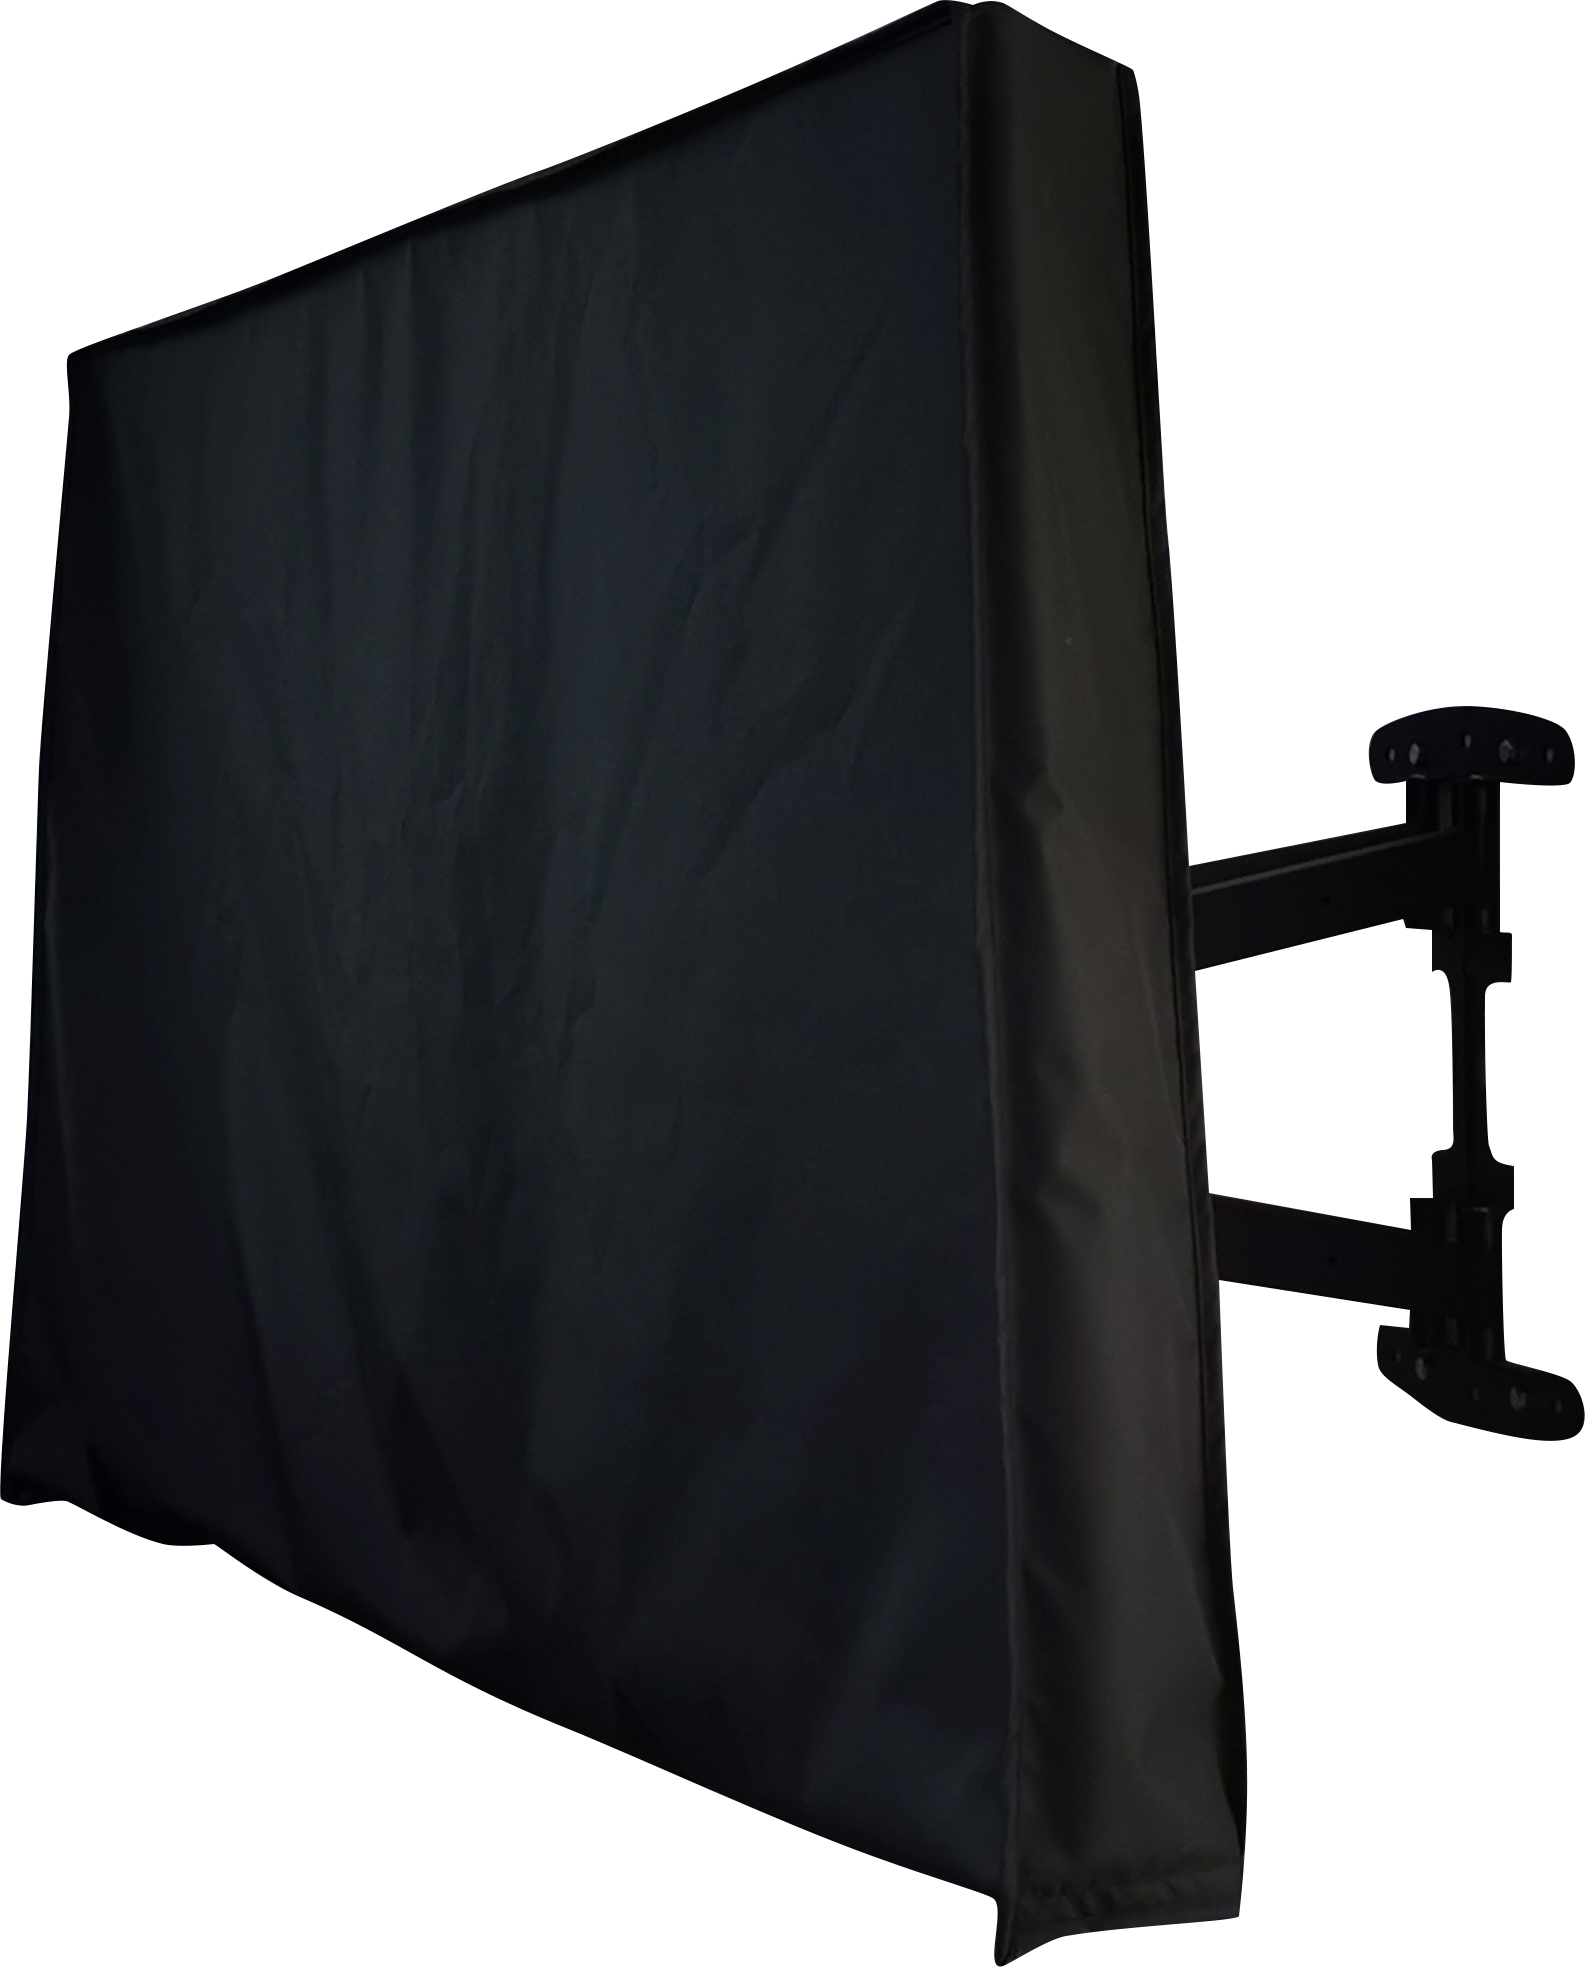 OUTDOOR TV COVER 42''